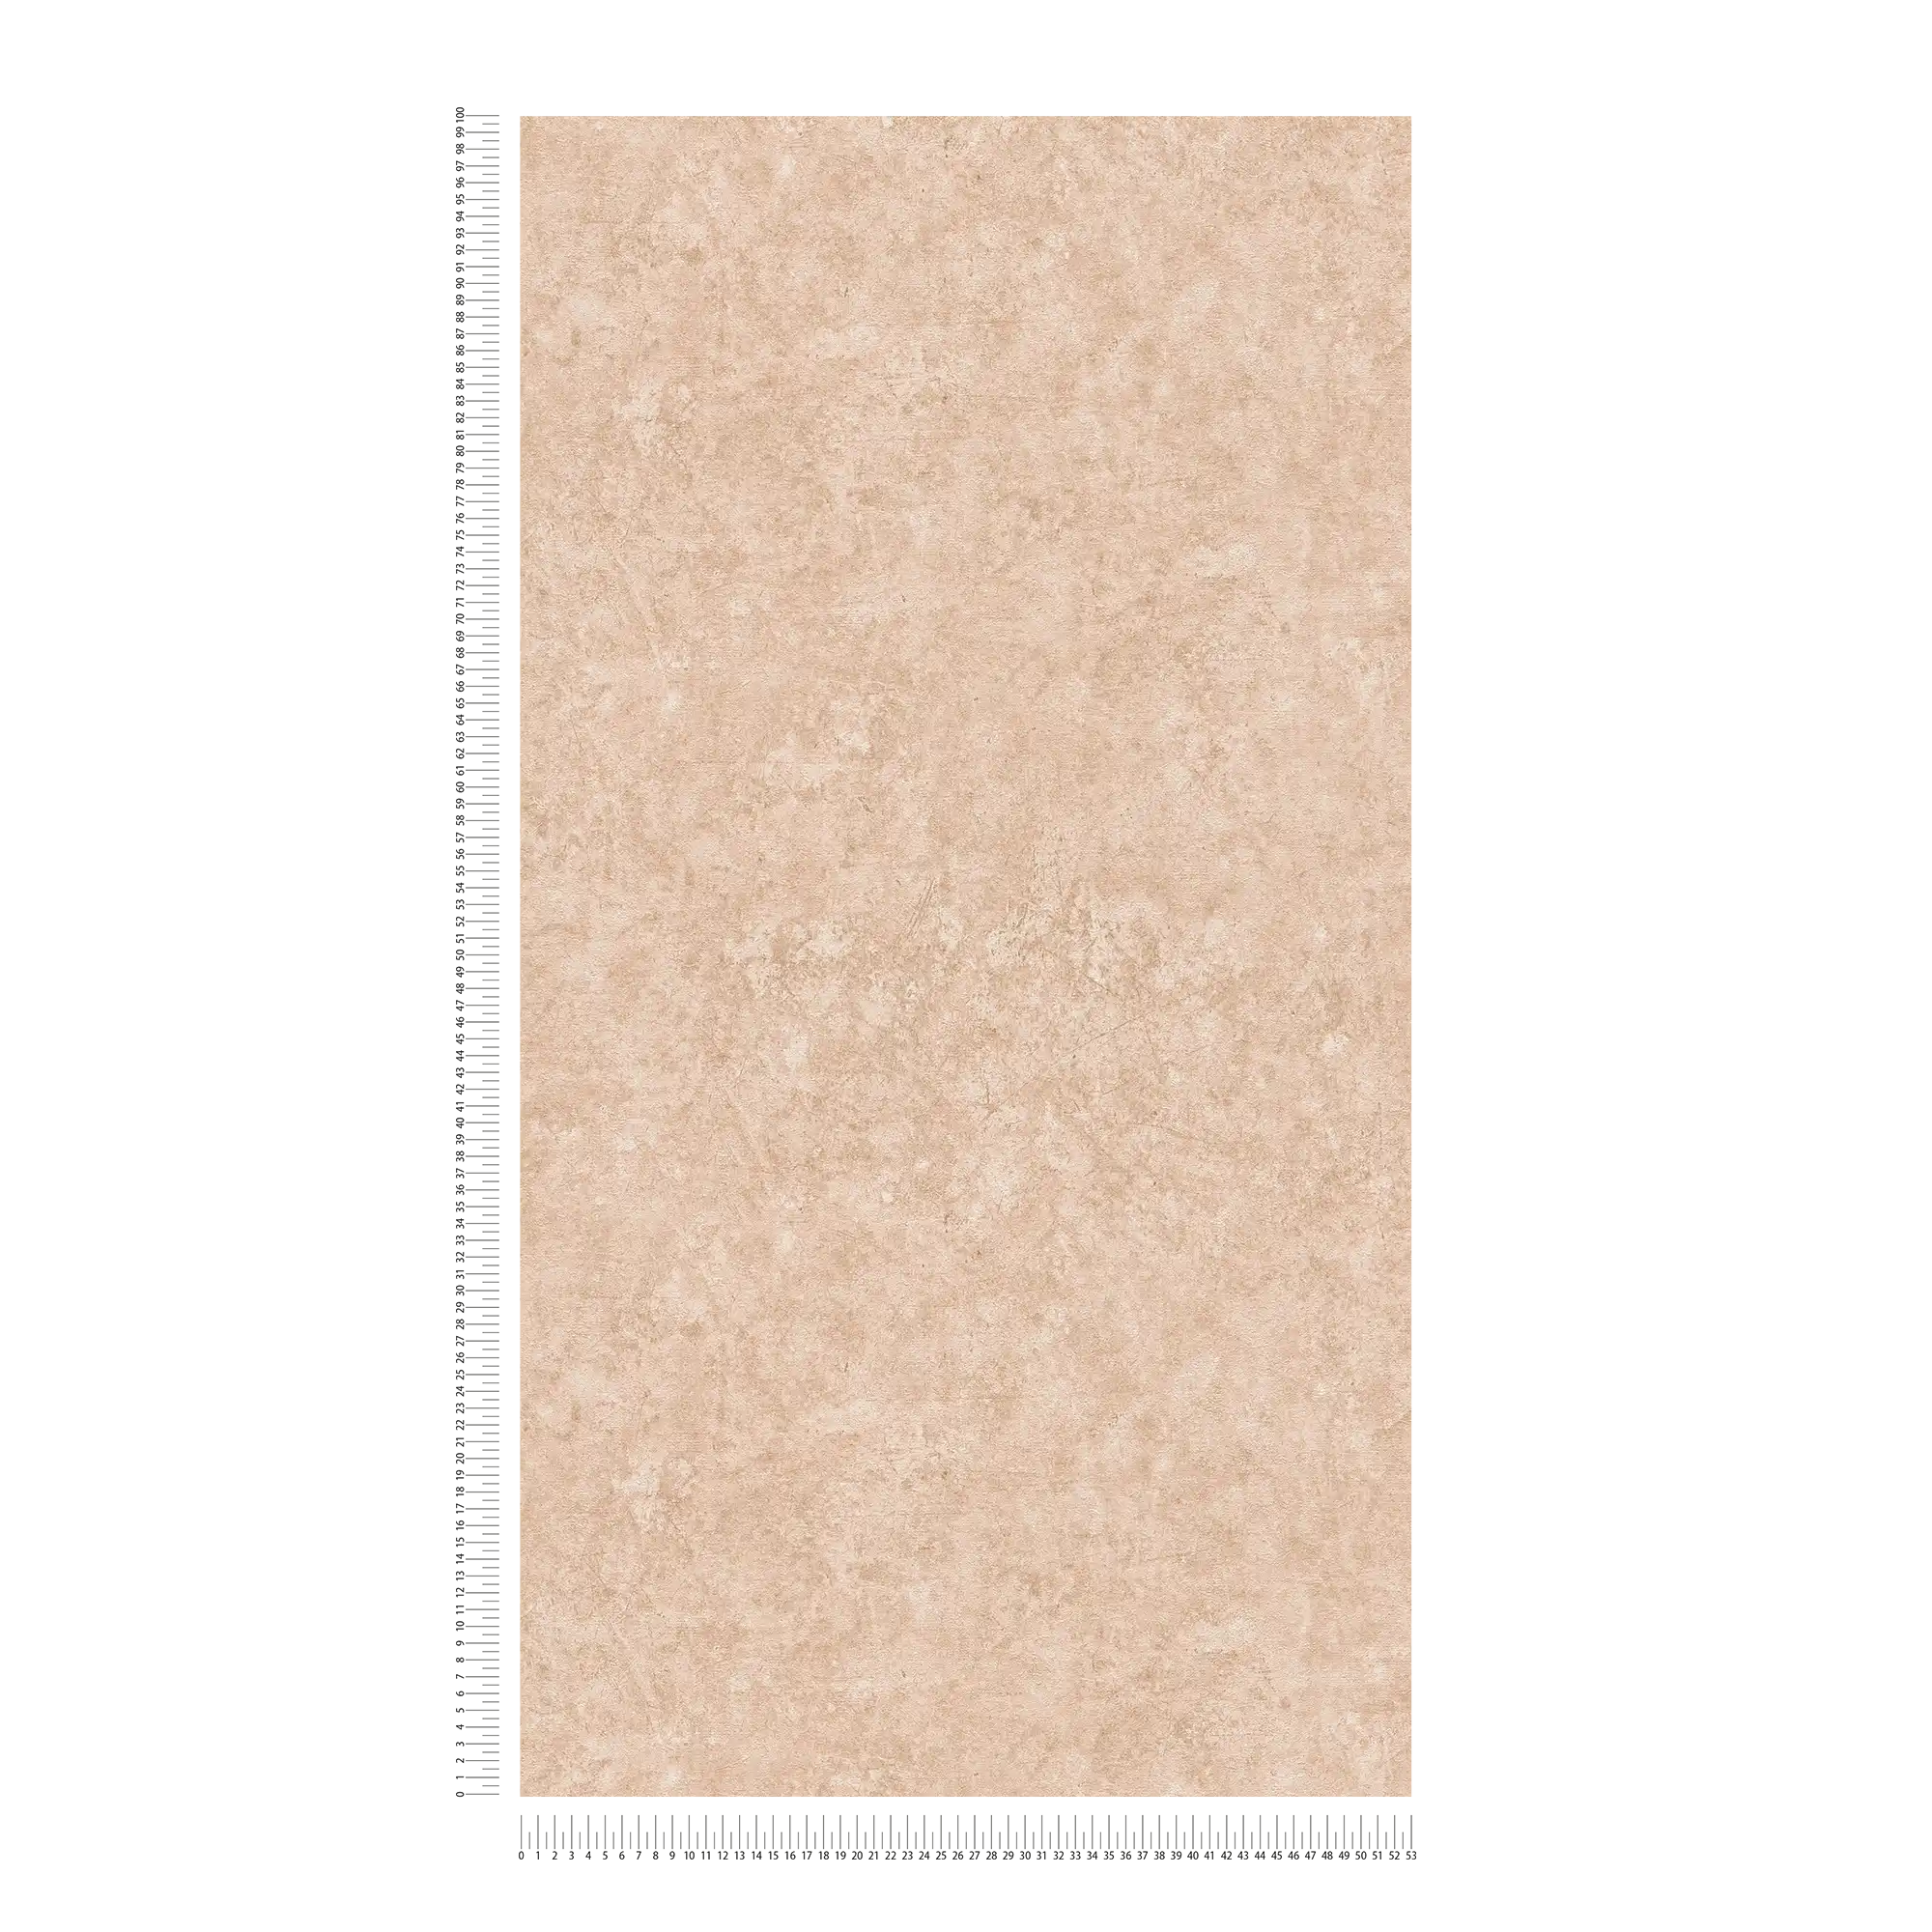             Non-woven wallpaper plain with textured pattern - light brown, beige
        